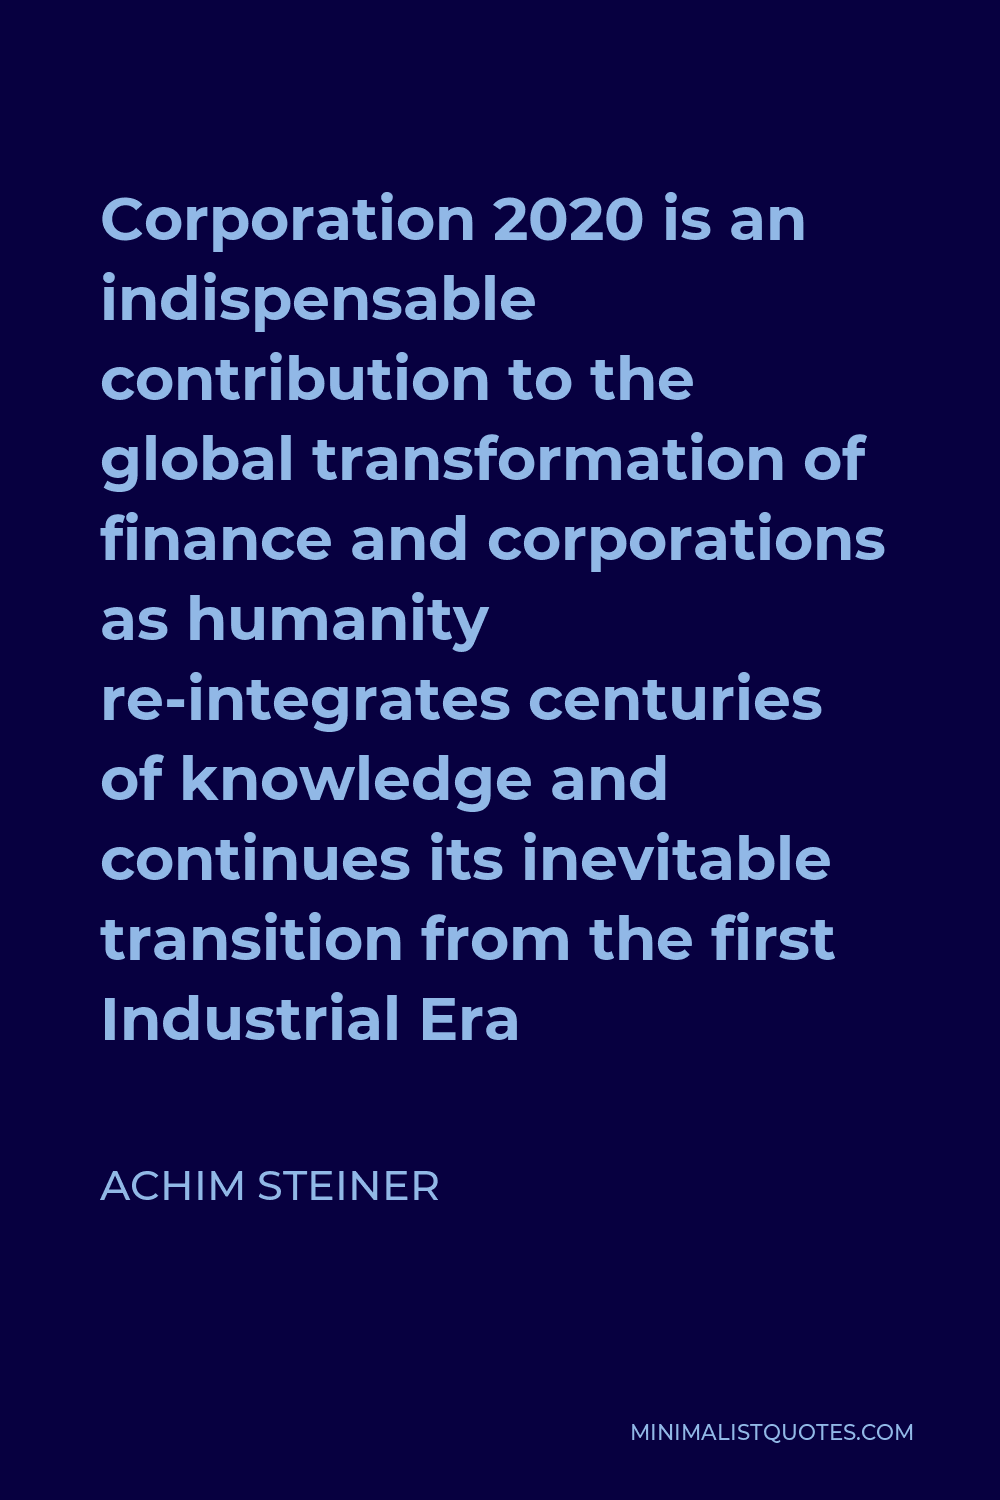 Achim Steiner Quote - Corporation 2020 is an indispensable contribution to the global transformation of finance and corporations as humanity re-integrates centuries of knowledge and continues its inevitable transition from the first Industrial Era